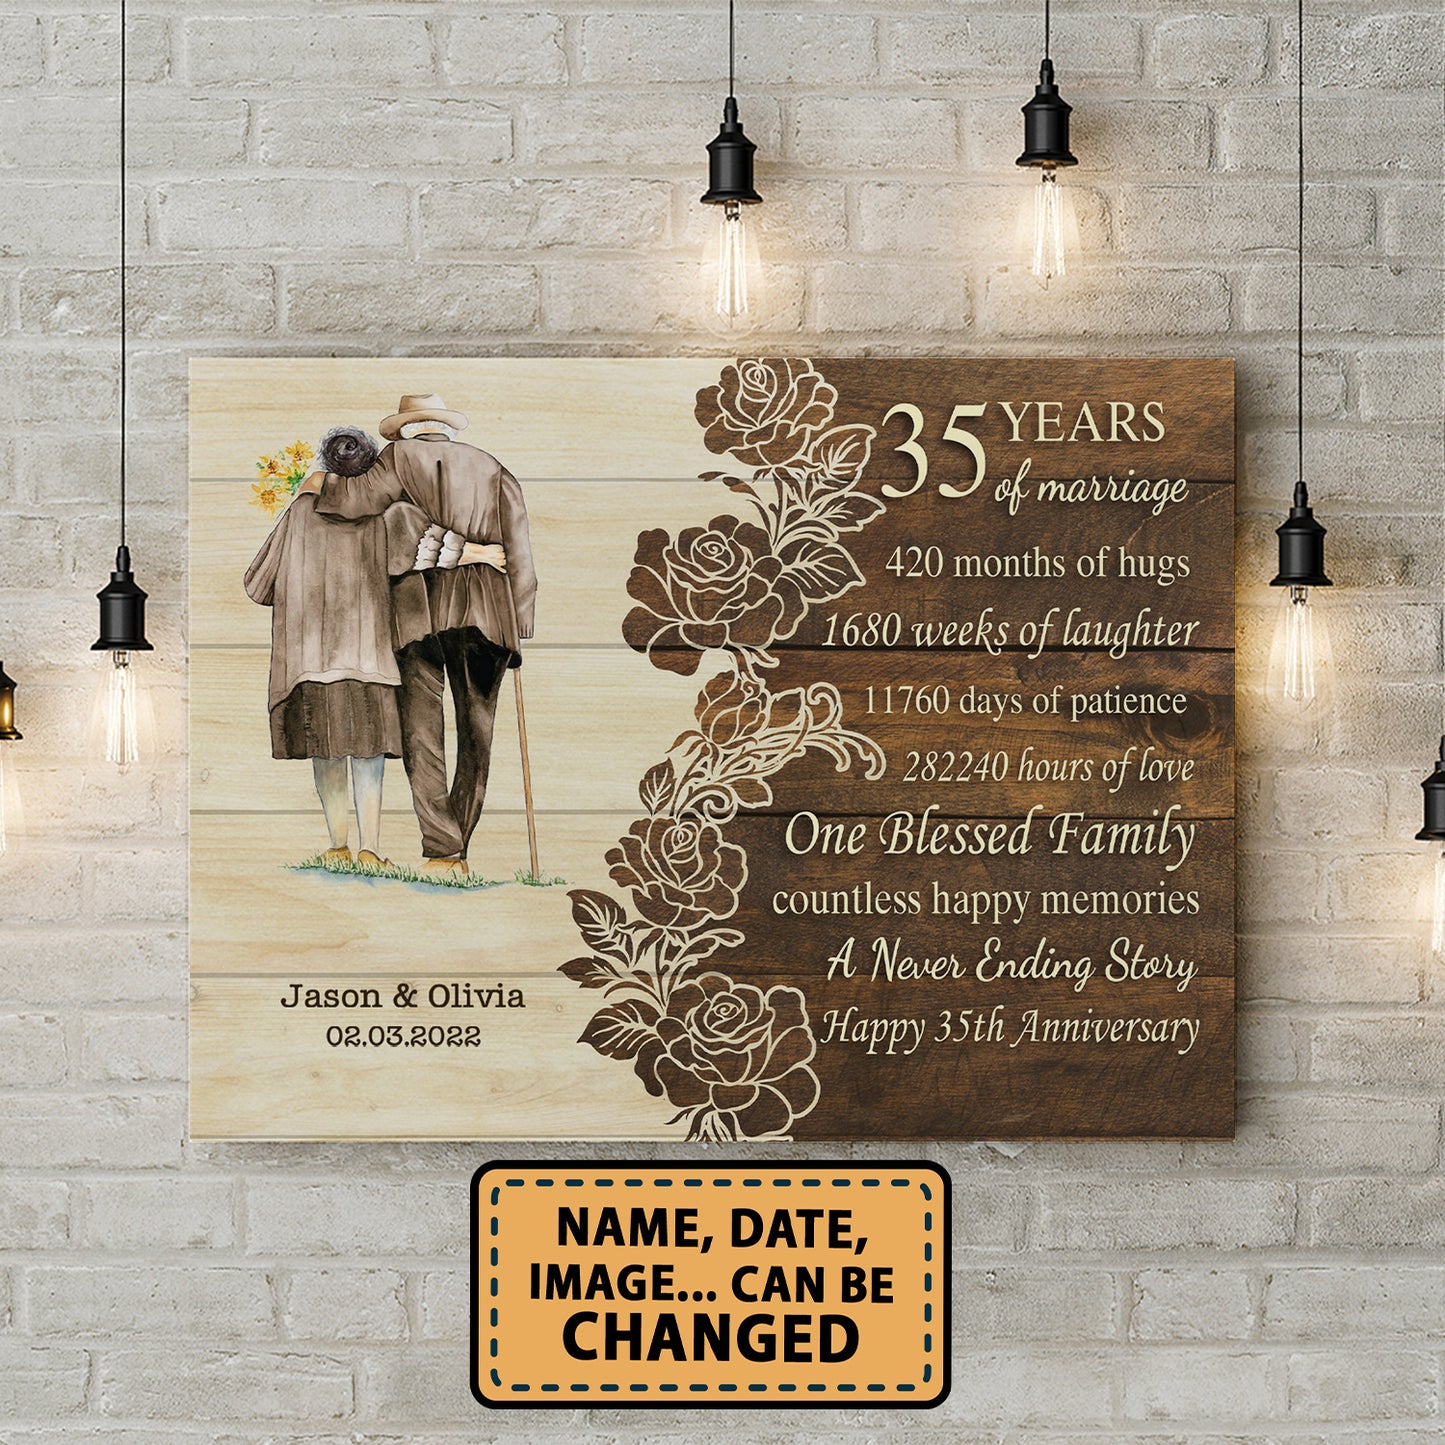 Happy 35th Anniversary 35 Years Of Marriage Personalizedwitch Canvas